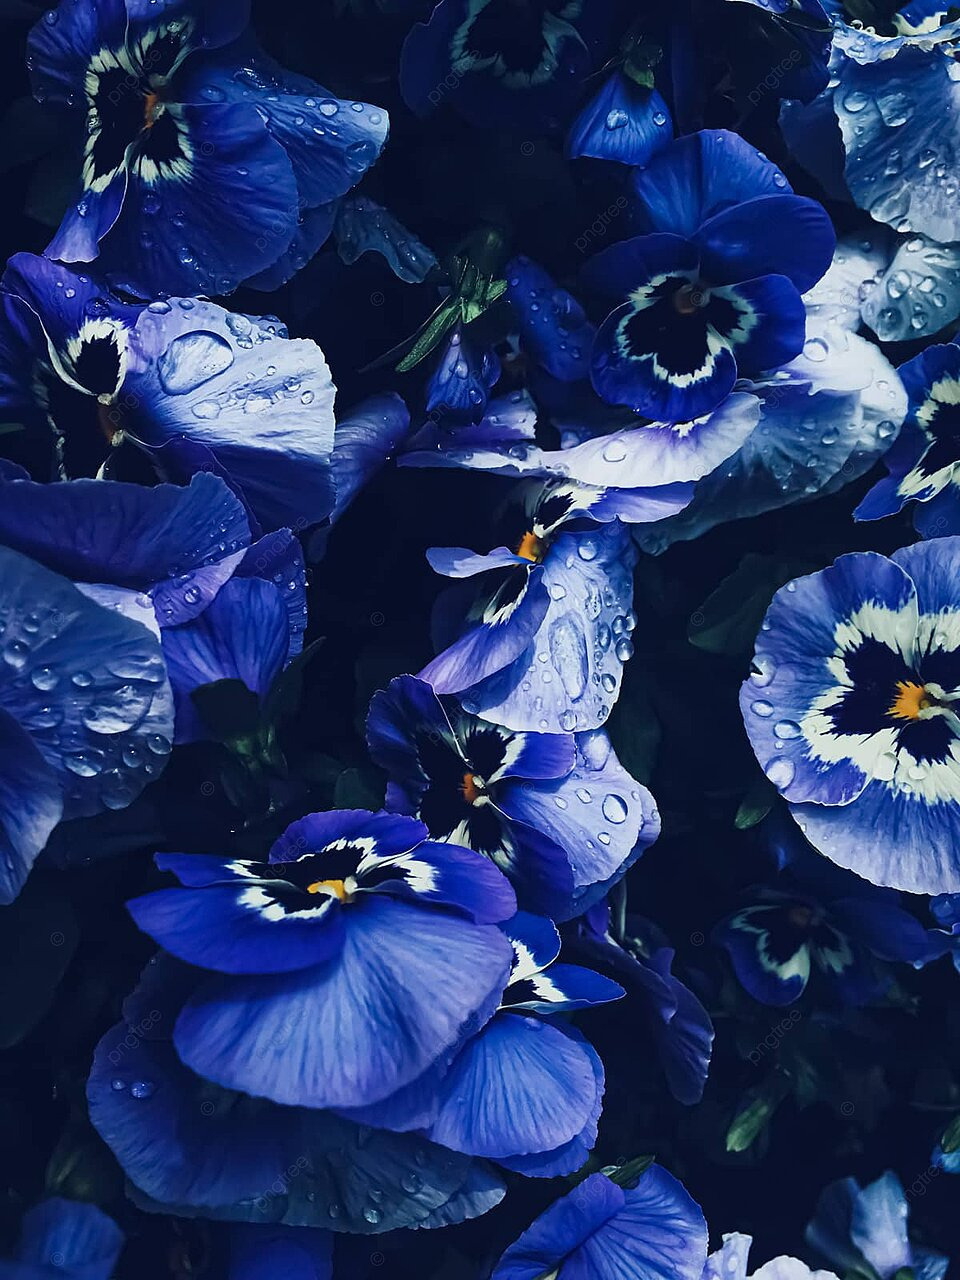 Natures Beauty A Blue Flower Blooms Against A Dark Background Photo And Picture For Free Download